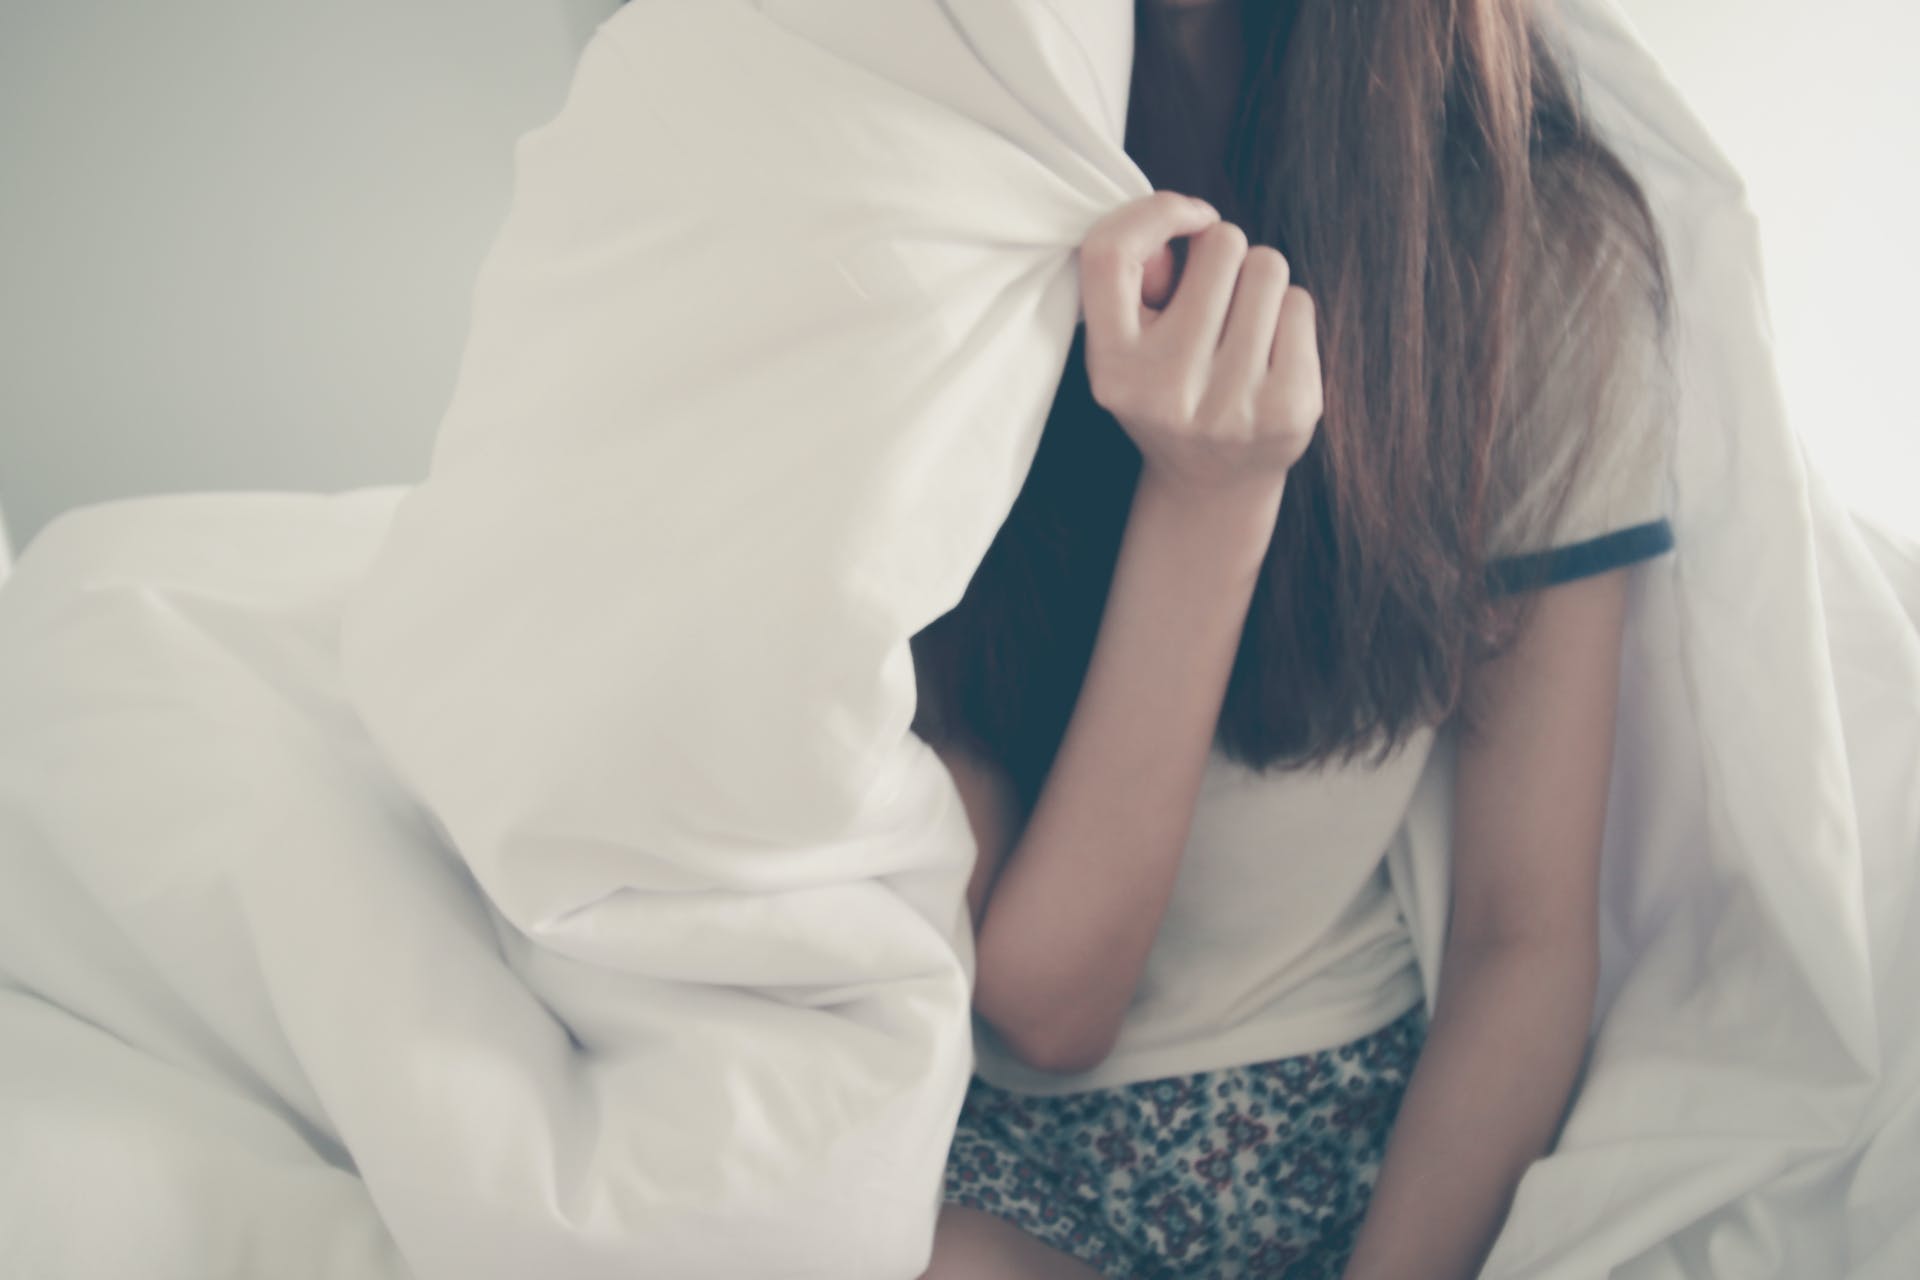 A young girl under a comforter | Source: Pexels